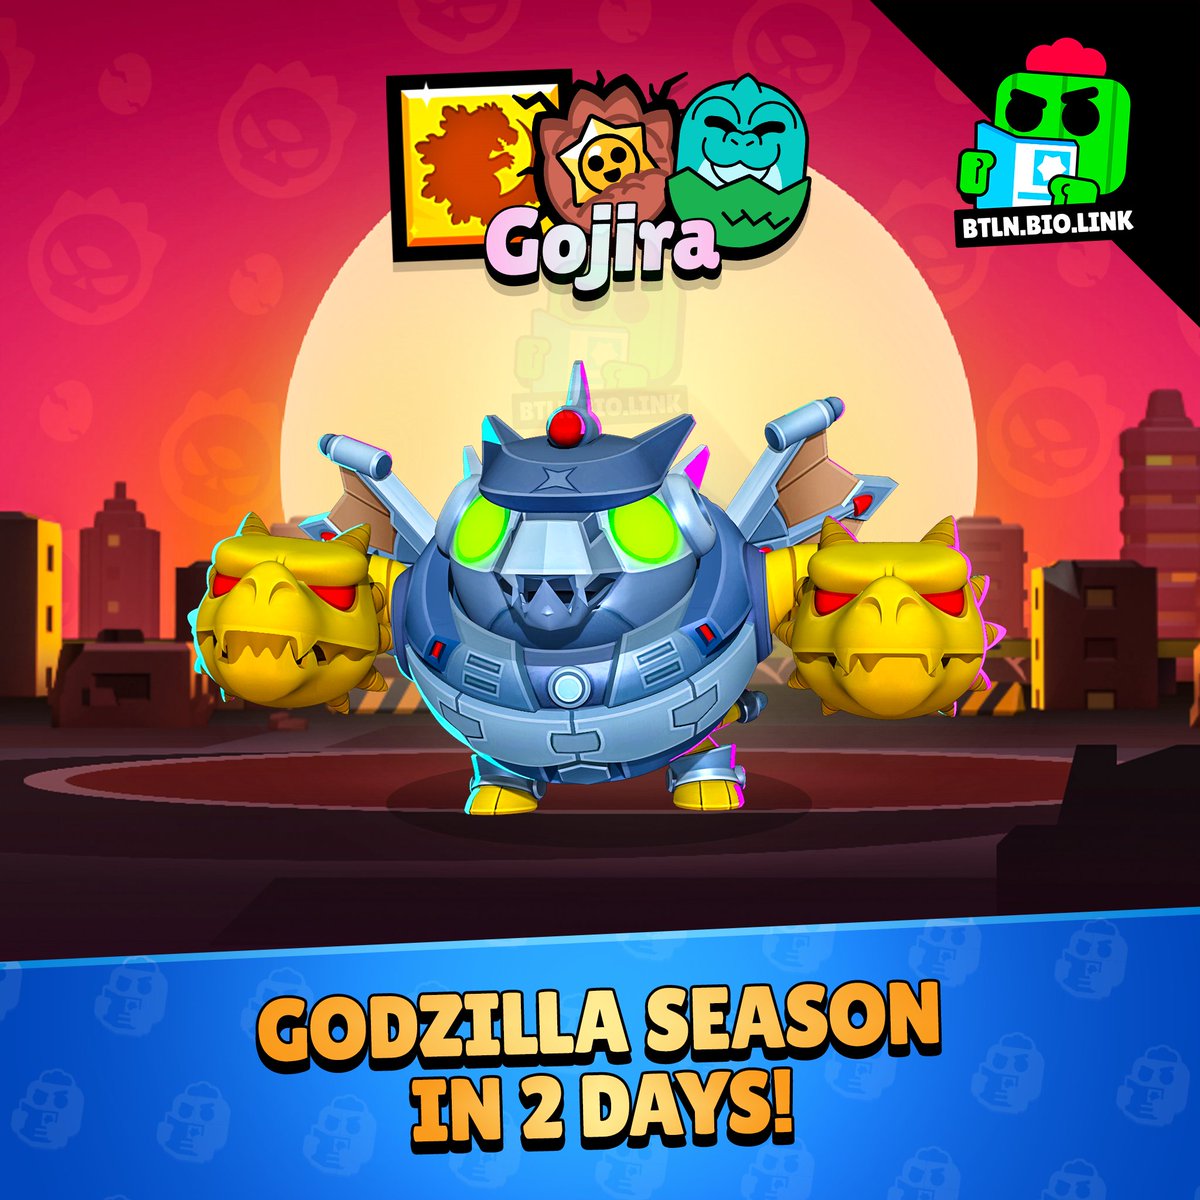 In just a moment, because in 2 days we'll have the Godzilla Brawl Pass Season! 🔥🦖

Mecha Tick will be available in the Lasts Tiers! 🤖

Remember to complete ALL Quests before the New Season Starts because as they will be gone. ❗

#BrawlStars #Godzilla